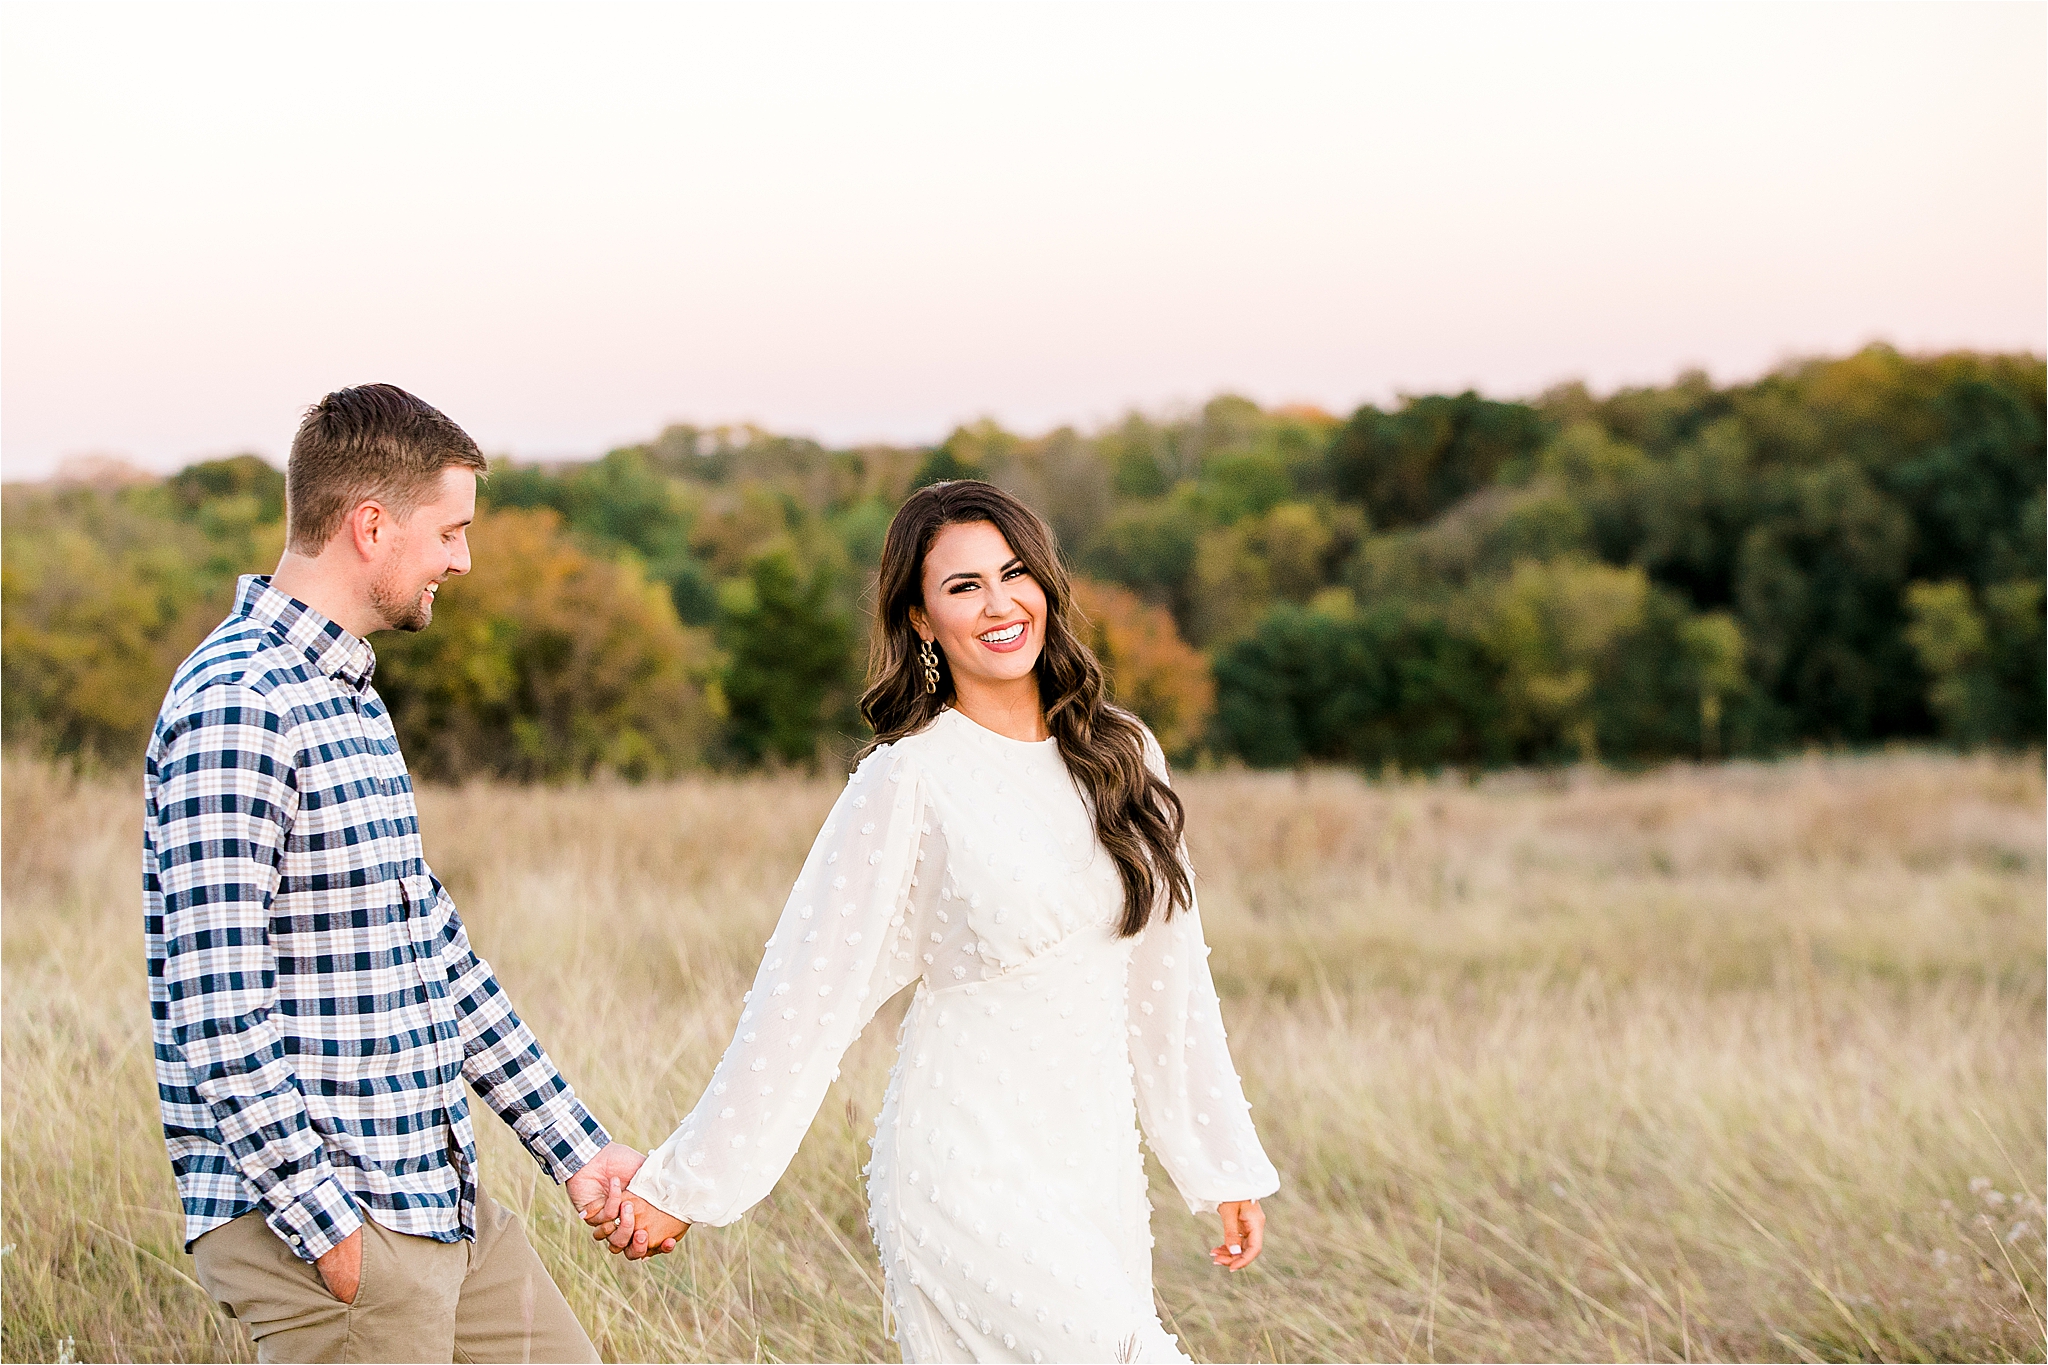 A smiling dallas bride to be pulls her fiance along in a field at sunset during their Fall engagement session 